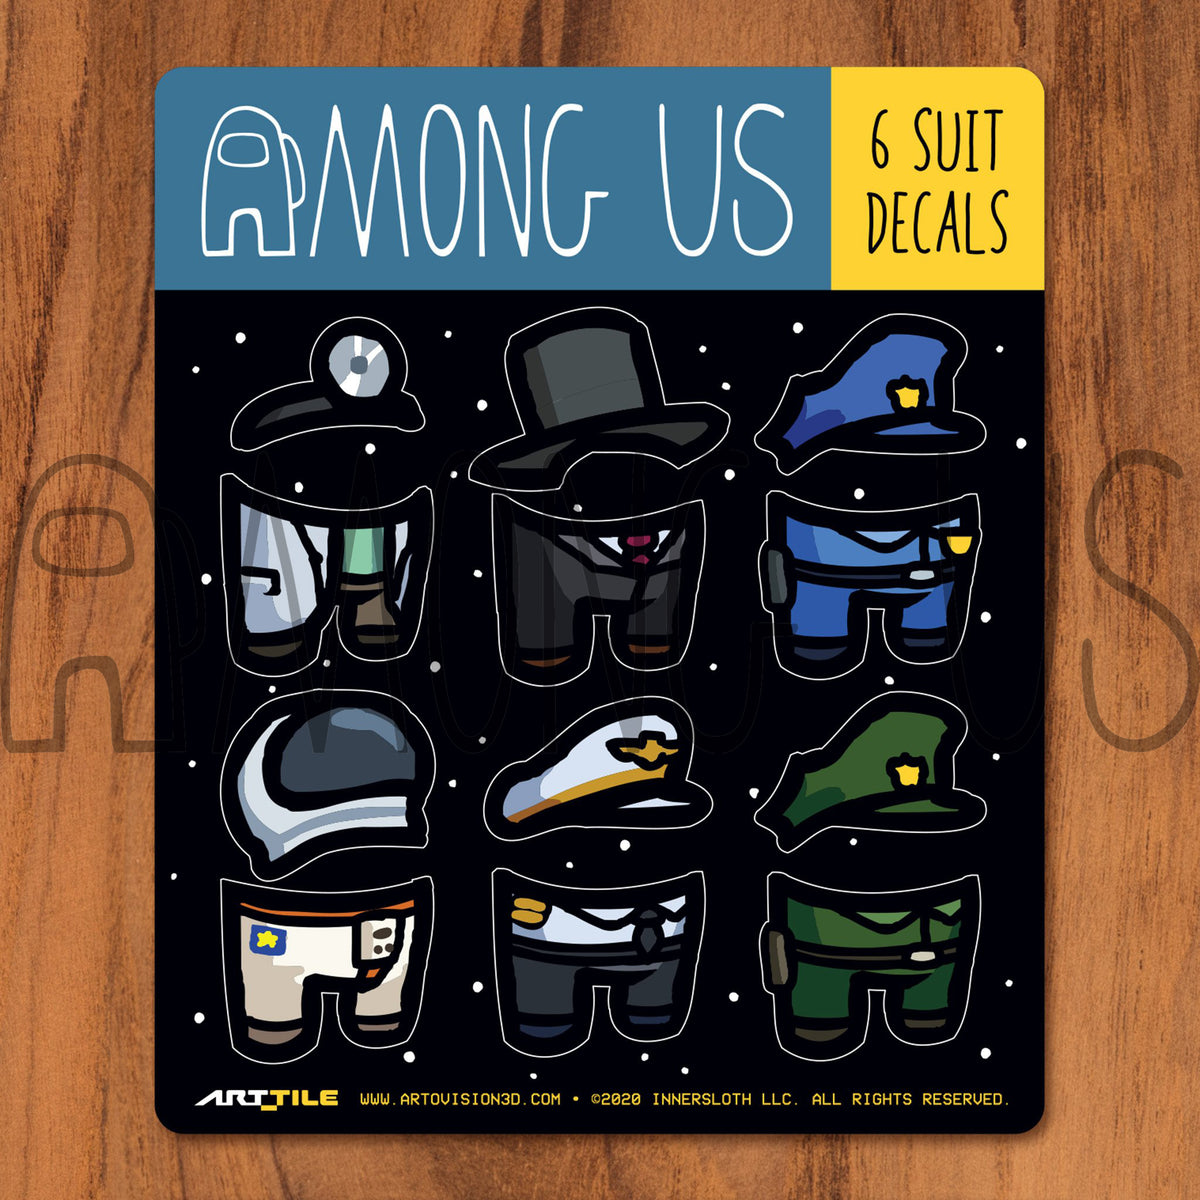 A product photograph of the suit decals that are part of the Among Us: Crewmate Art Tile Decals by Artovision3D. There are 6 skins with accompanying hat decals on this sheet: doctor, policeman, astronaut, pilot, military officer, and black suit with tophat.